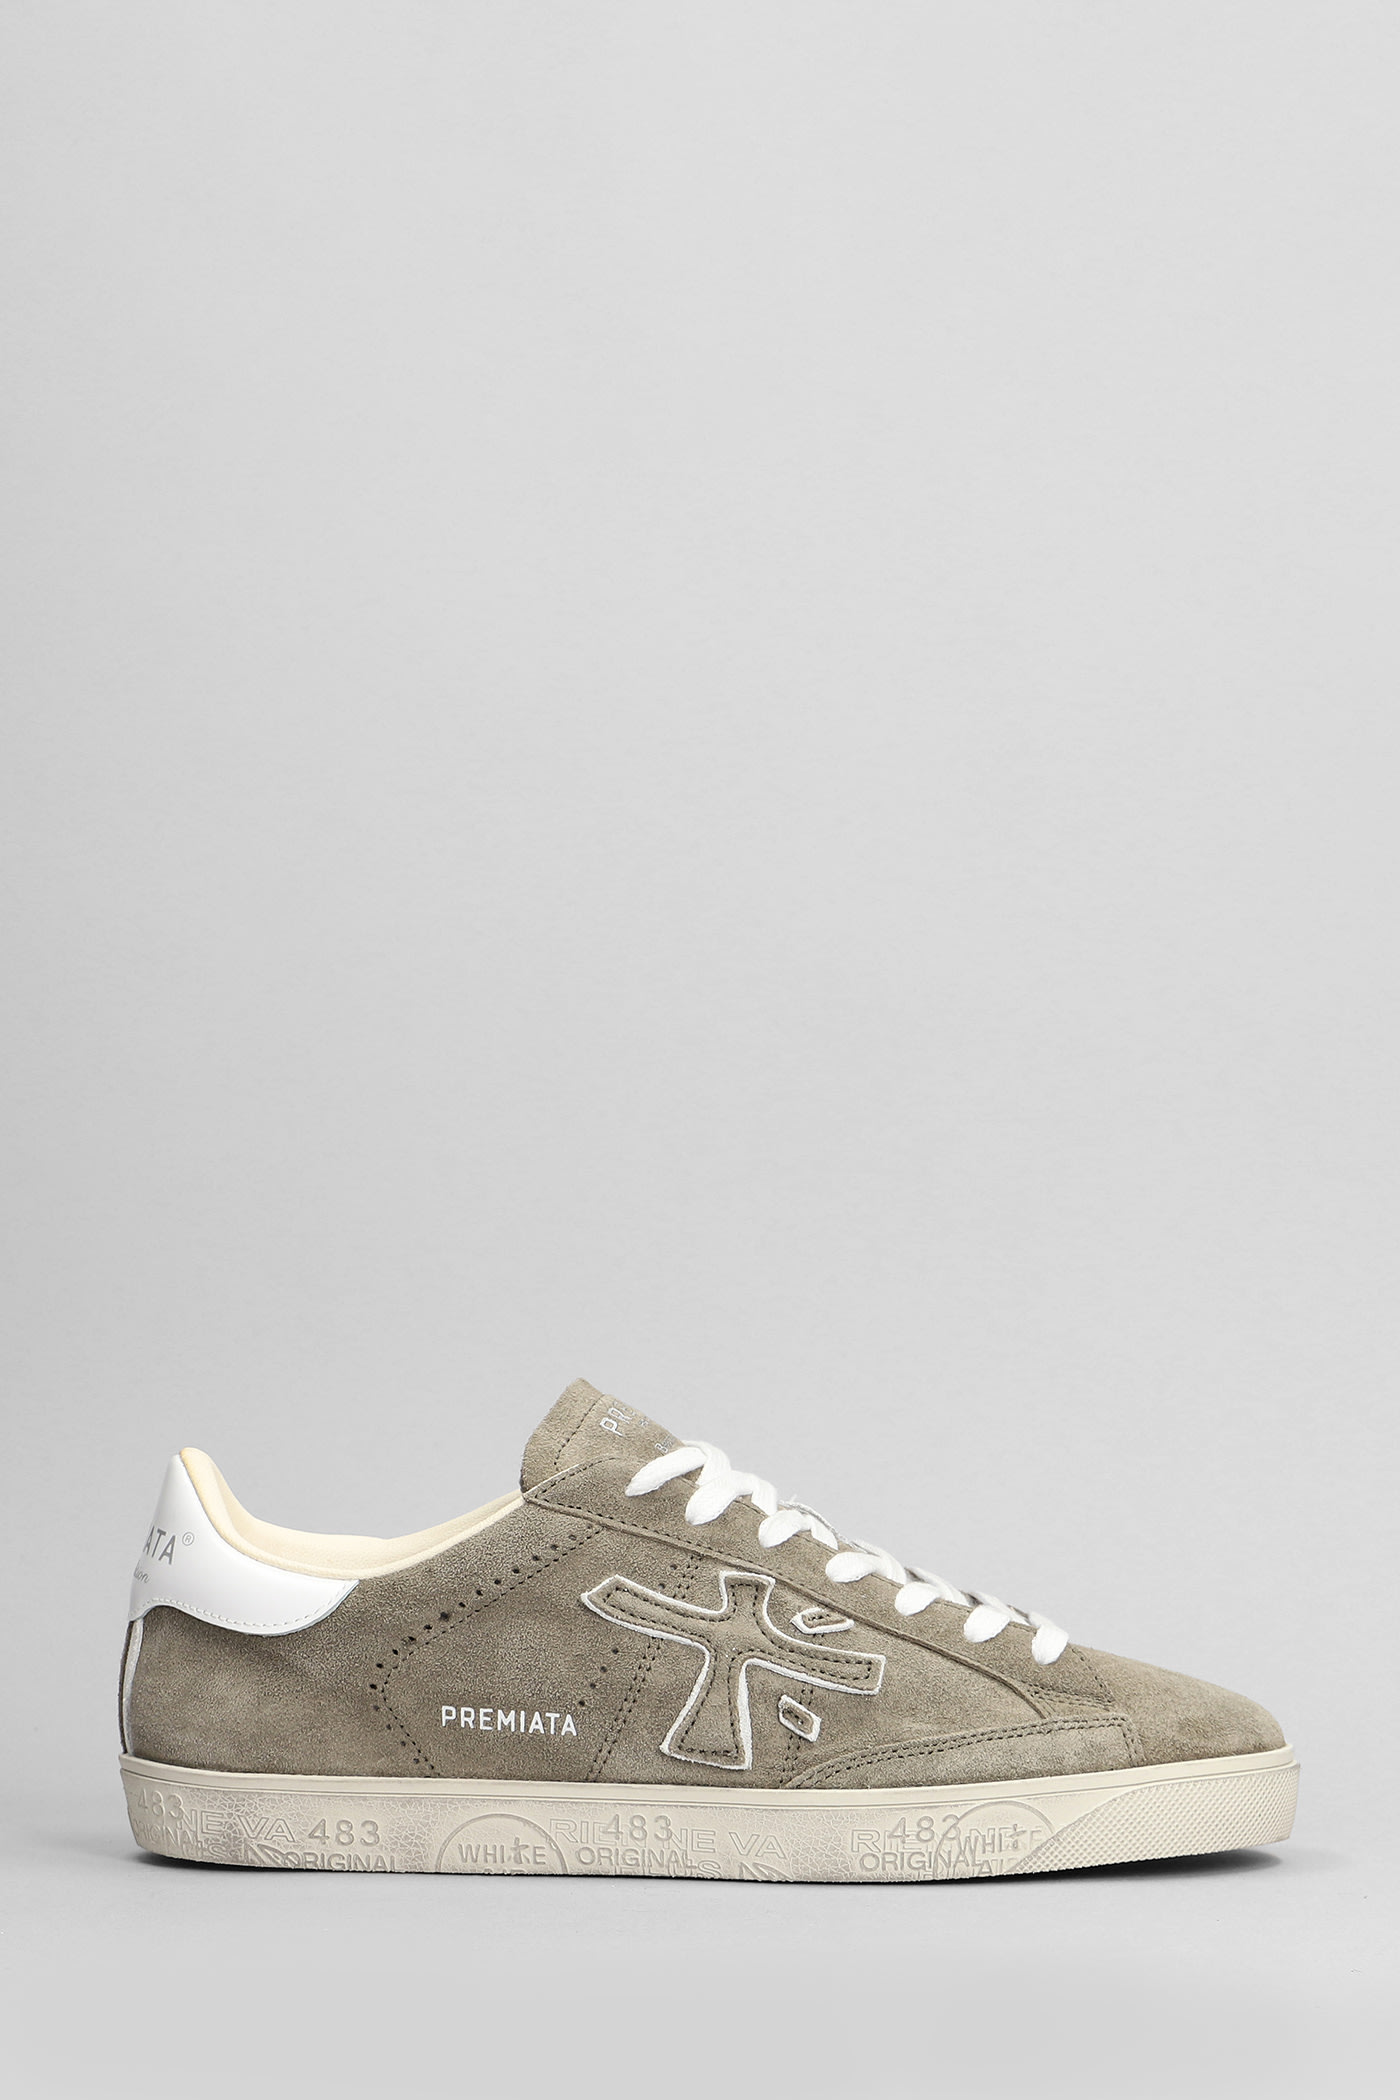 Premiata Steven Trainers In Taupe Suede And Fabric